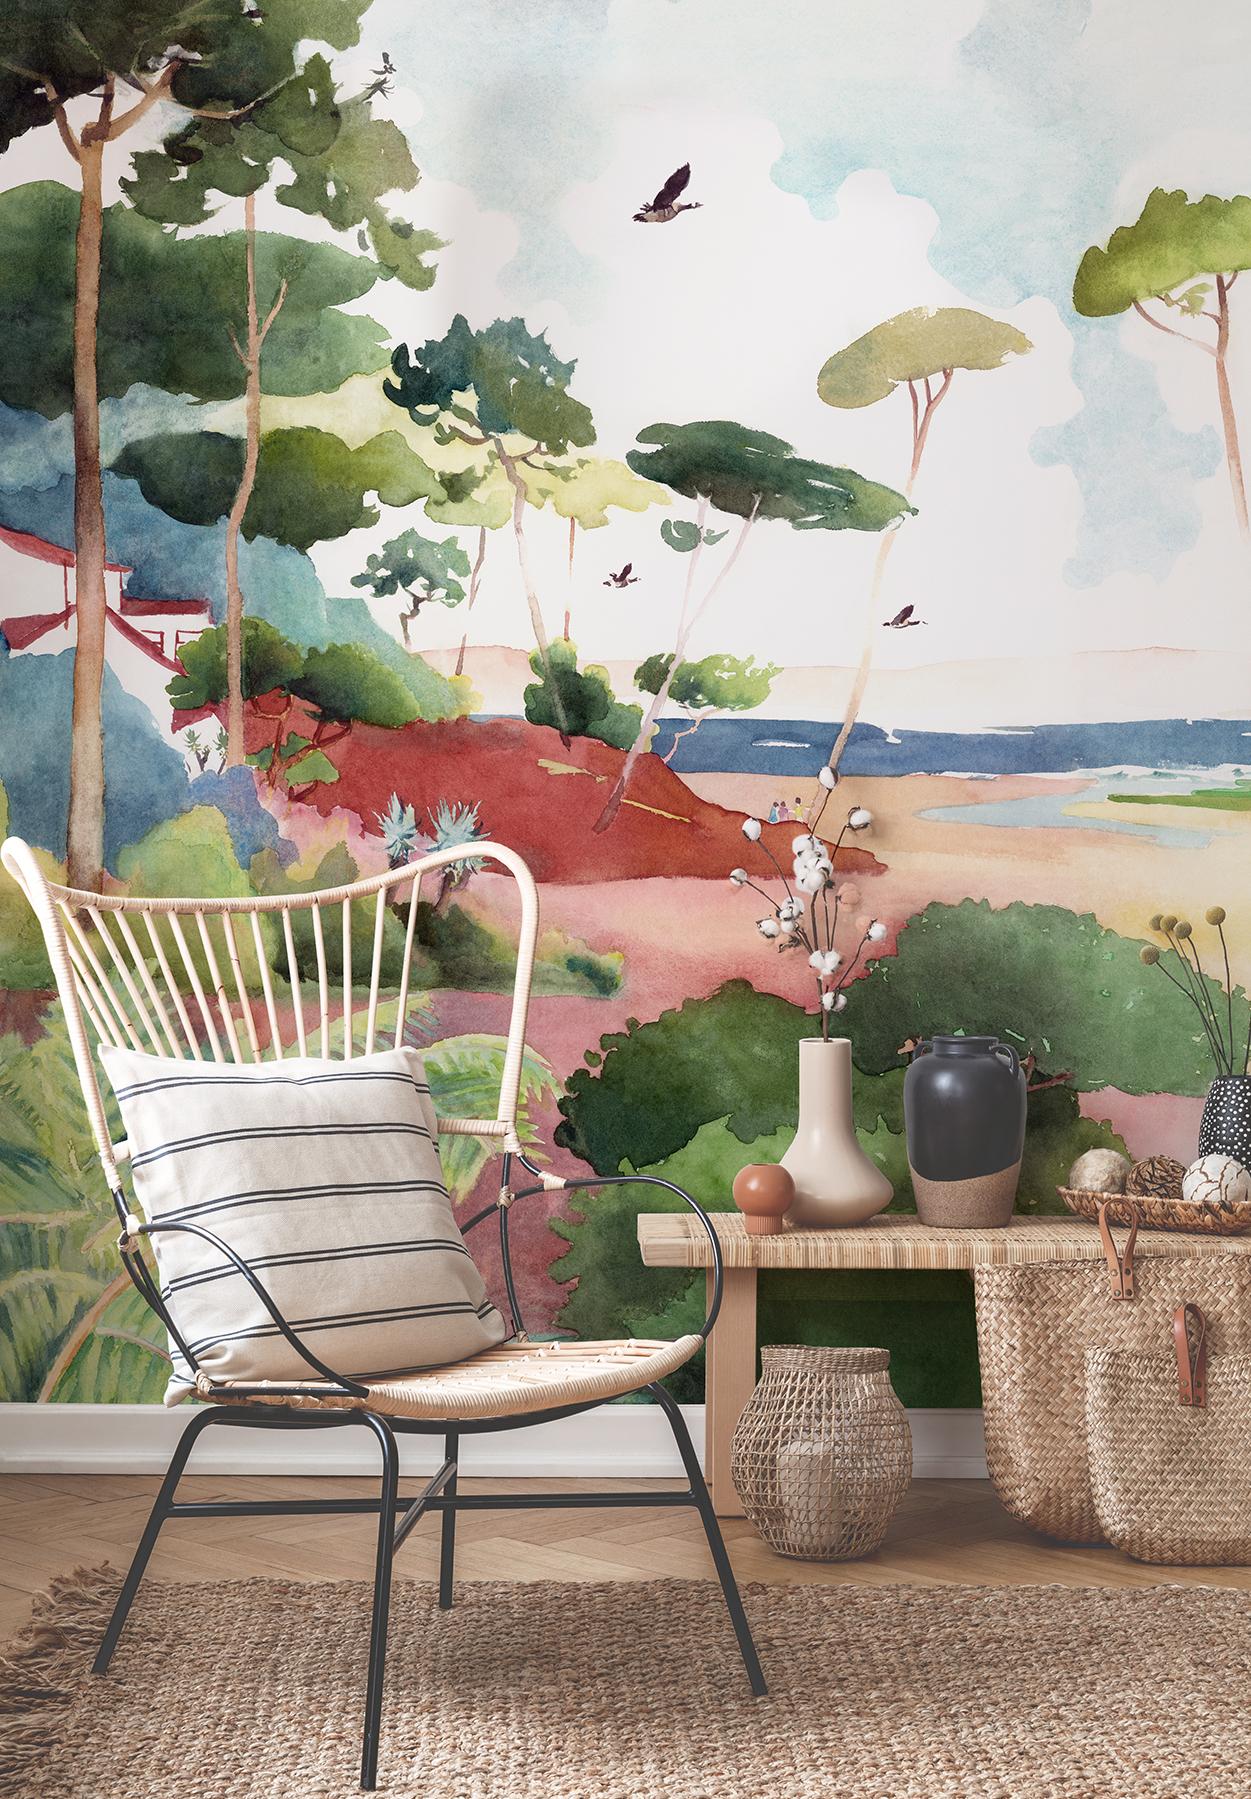 All our products are custom made. The price per square meter is 91 $. The price shown is for a 350cm wide by 250cm high wall

Take a walk through the colourful landscapes of the Cap Ferret coastline created with watercolours by Marion Bartherotte.